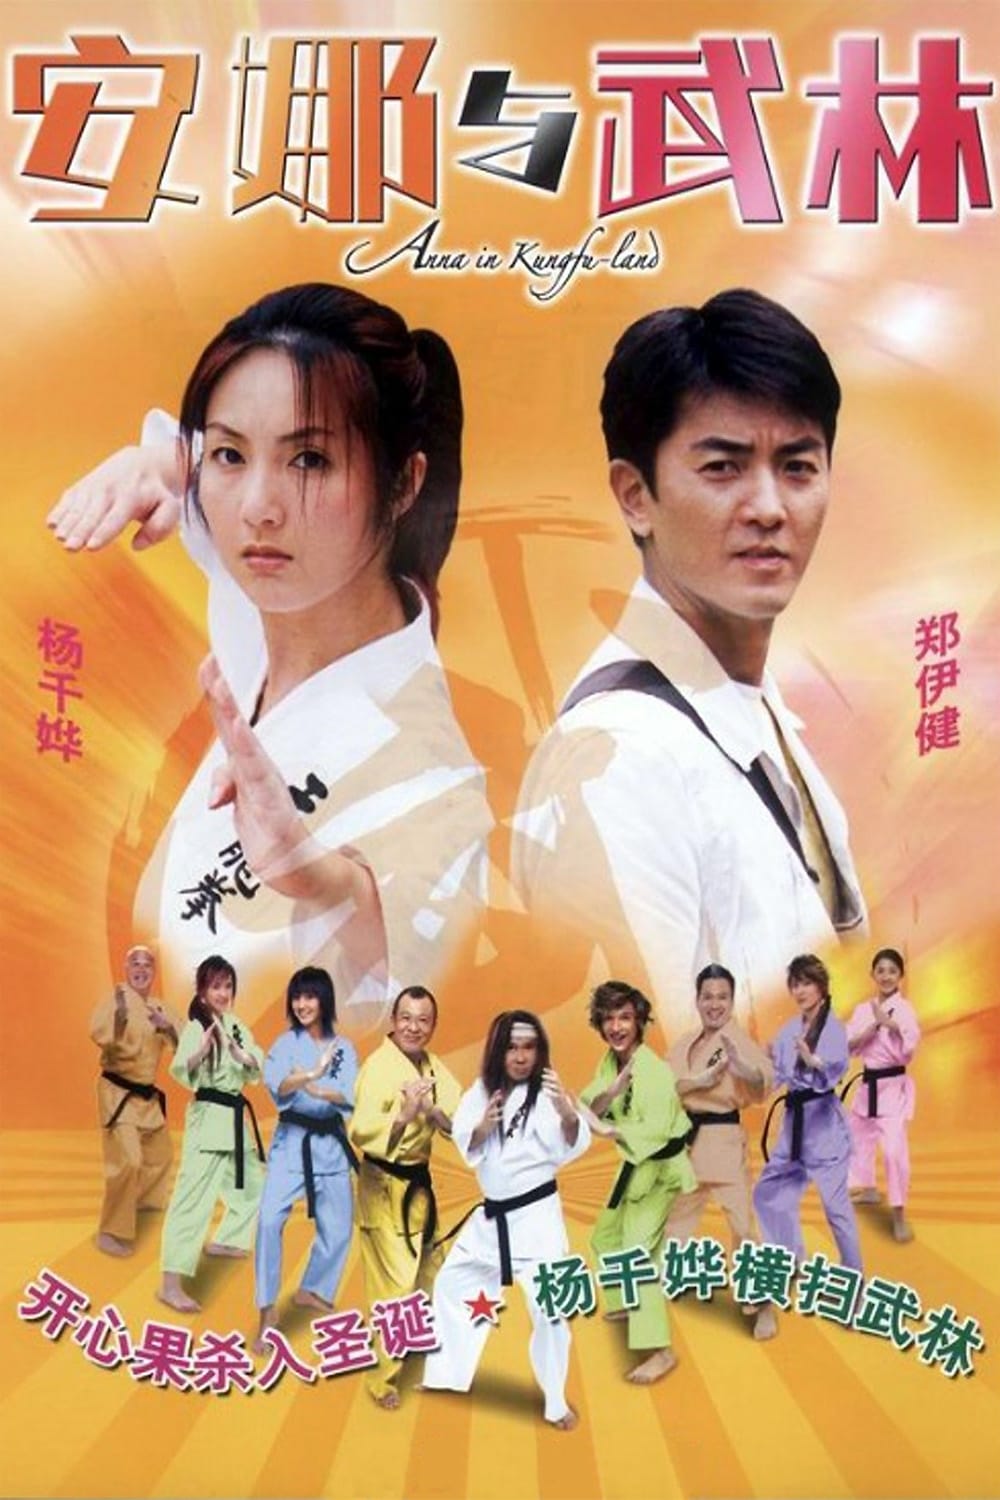 Anna in Kungfu-land (2003)